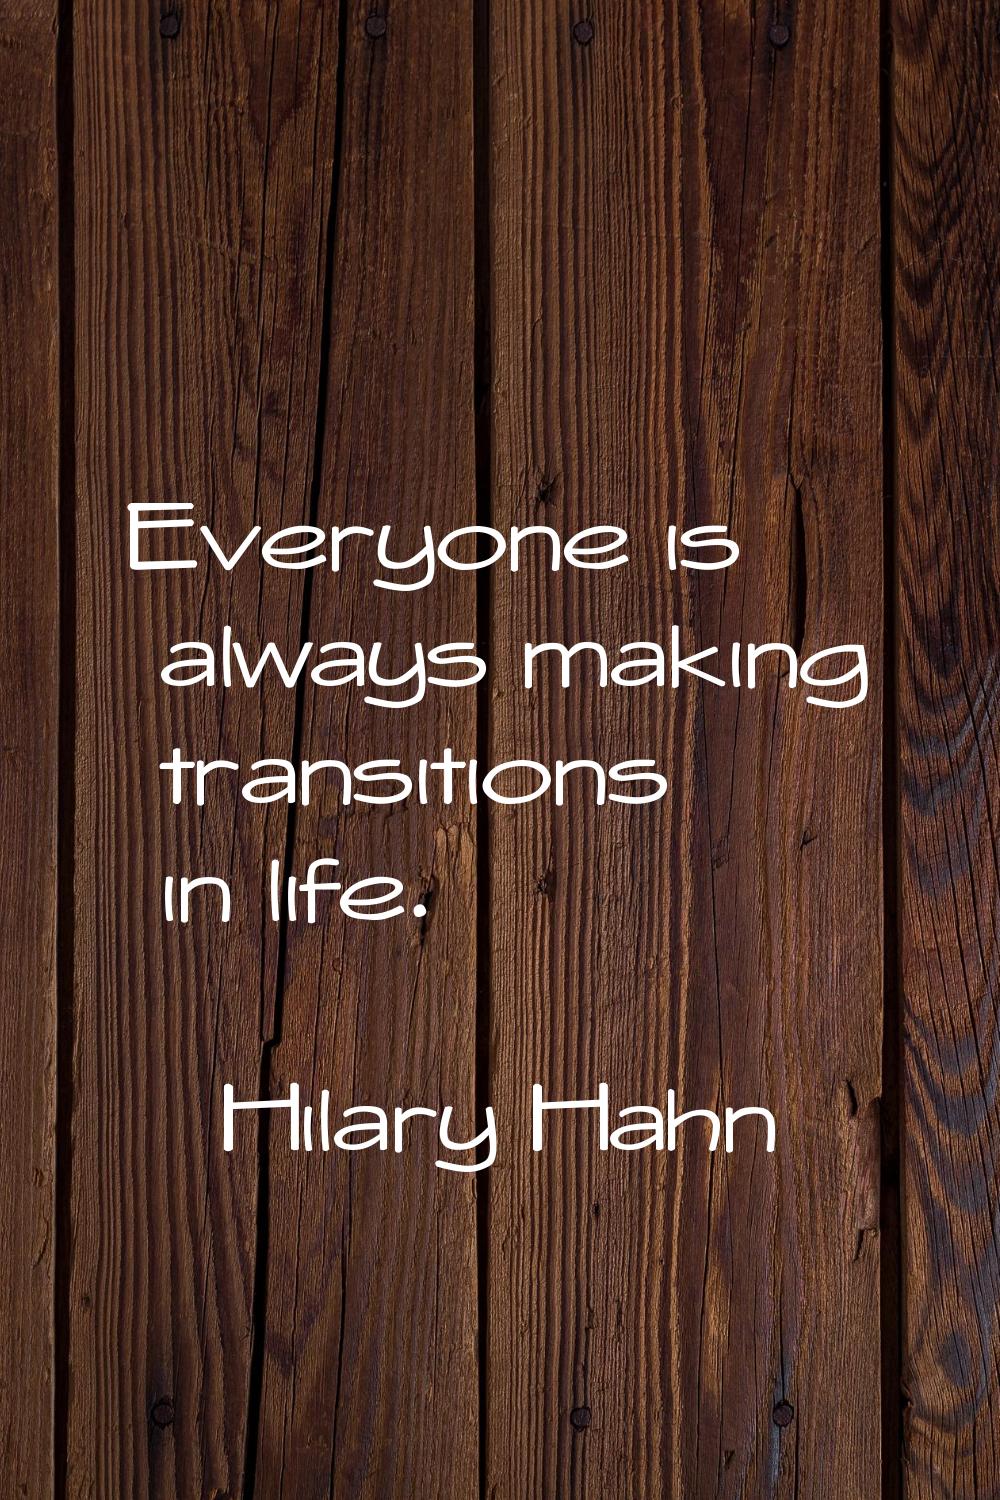 Everyone is always making transitions in life.